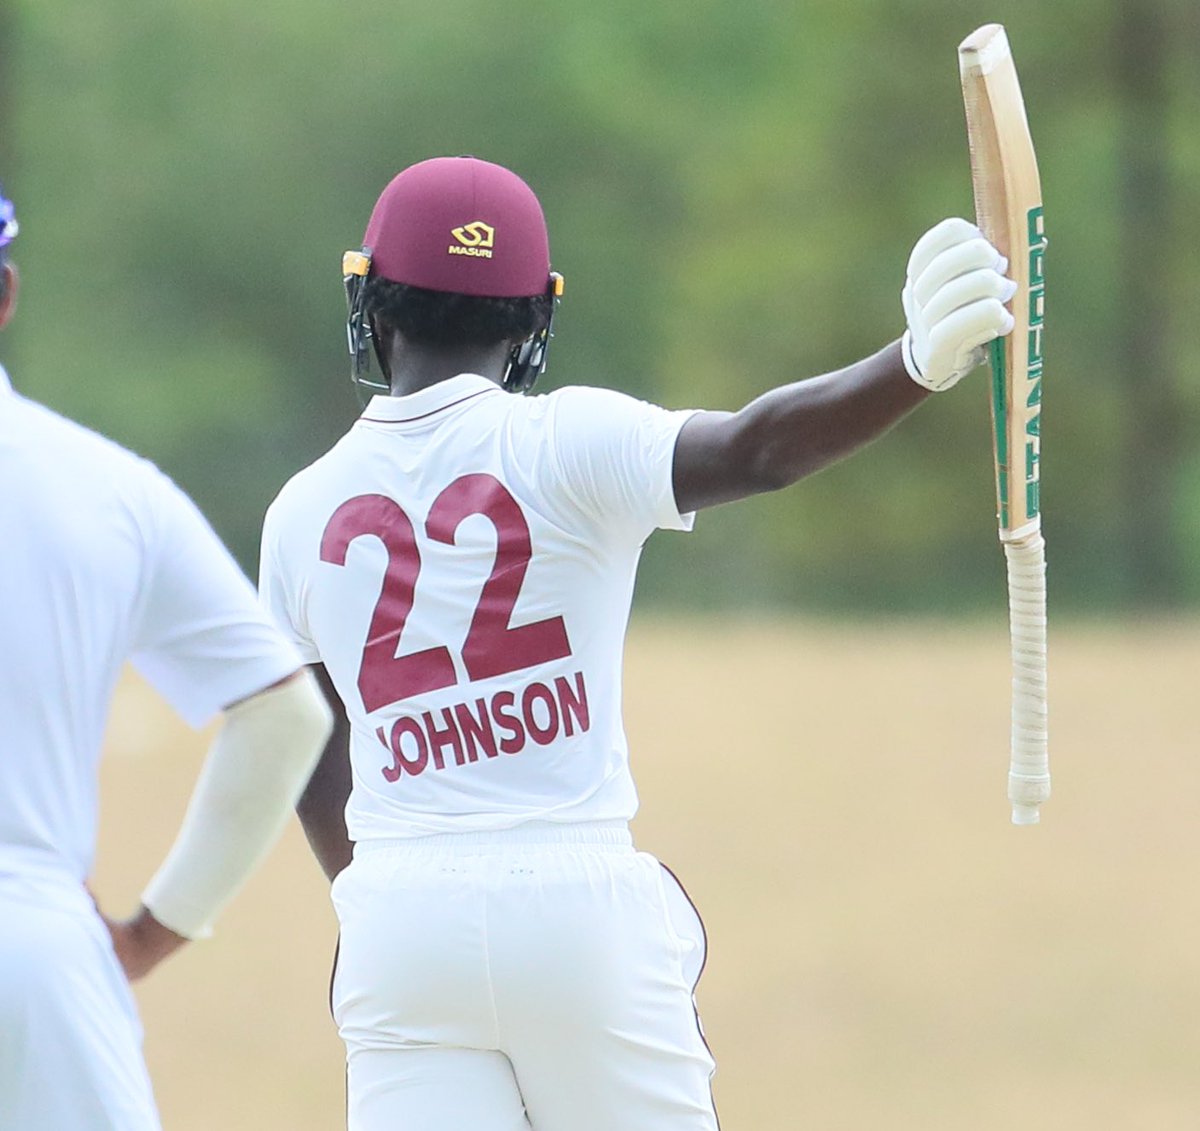 Young Jordan Johnson continues to shine, scoring a brilliant century (149) against SriLankaU19 in the ongoing Youth Test Match. 
Pic via @windiescricket 
#Ggsmsports #JordanJohnson #WIU19 #Windies #Youth #Jamaica  #Cricket #cricketlovers #Testcricket #WestIndies #SriLanka